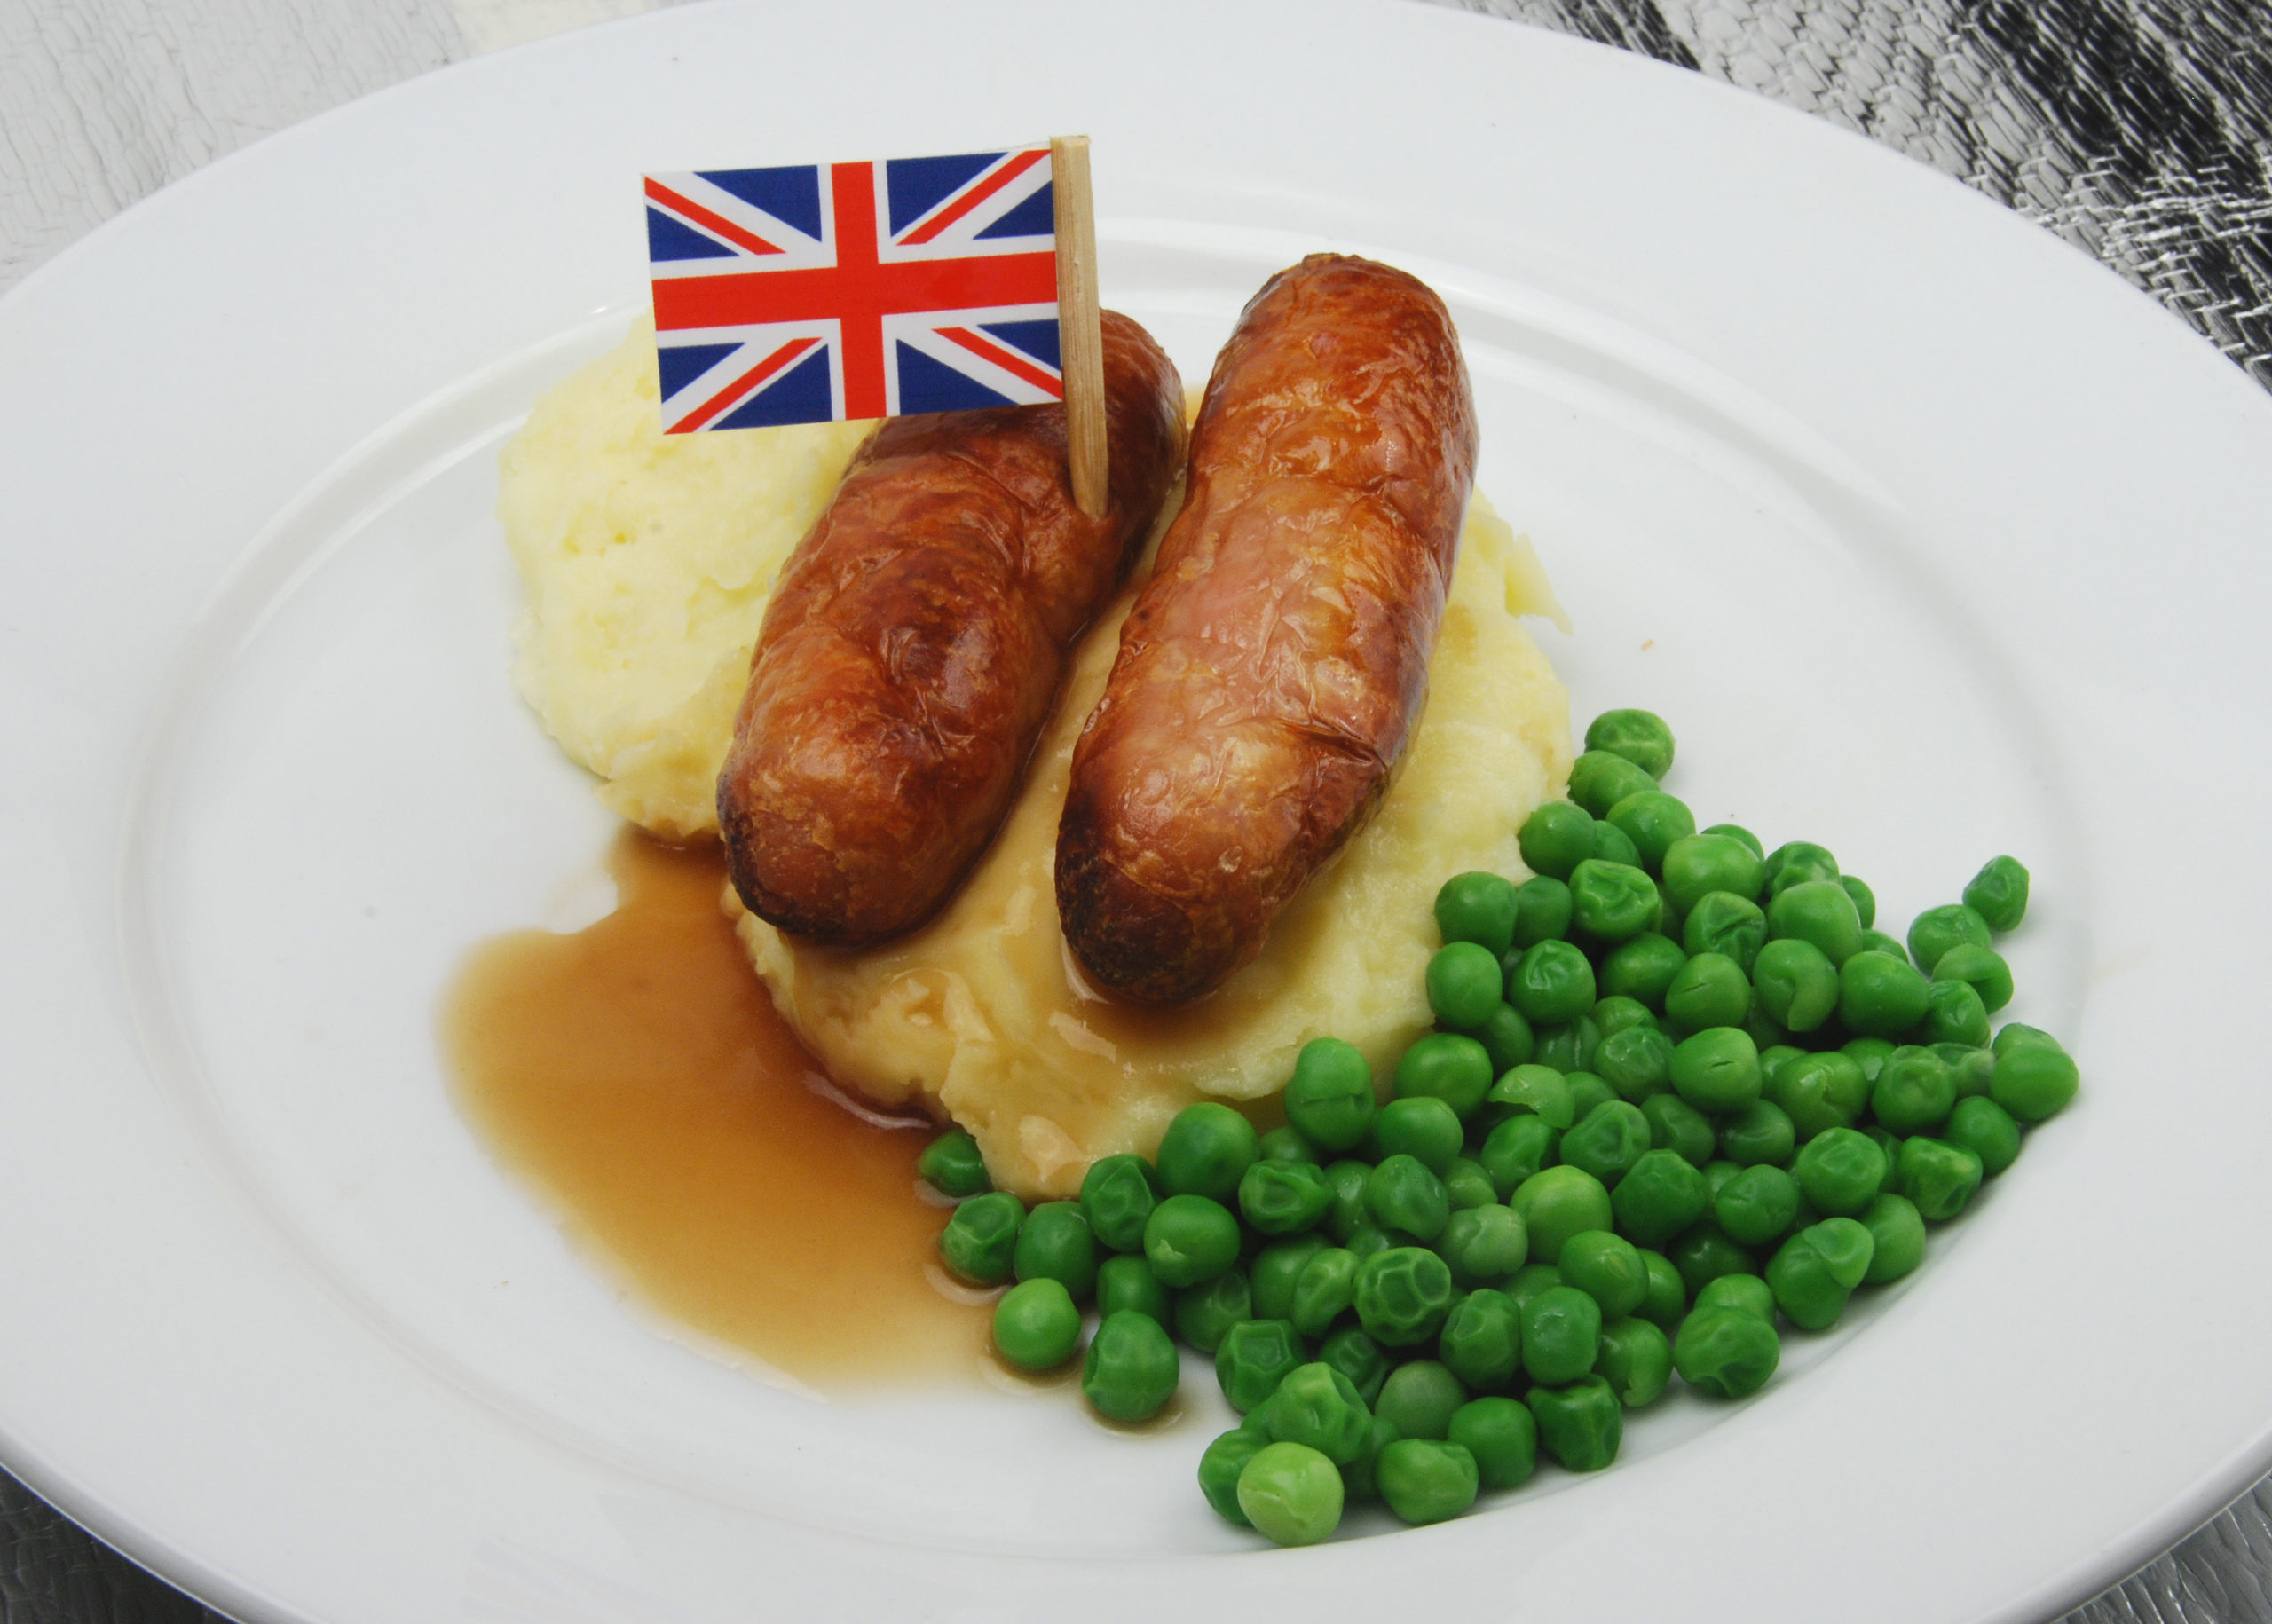 The campaign aimed to drum up support for British pork.